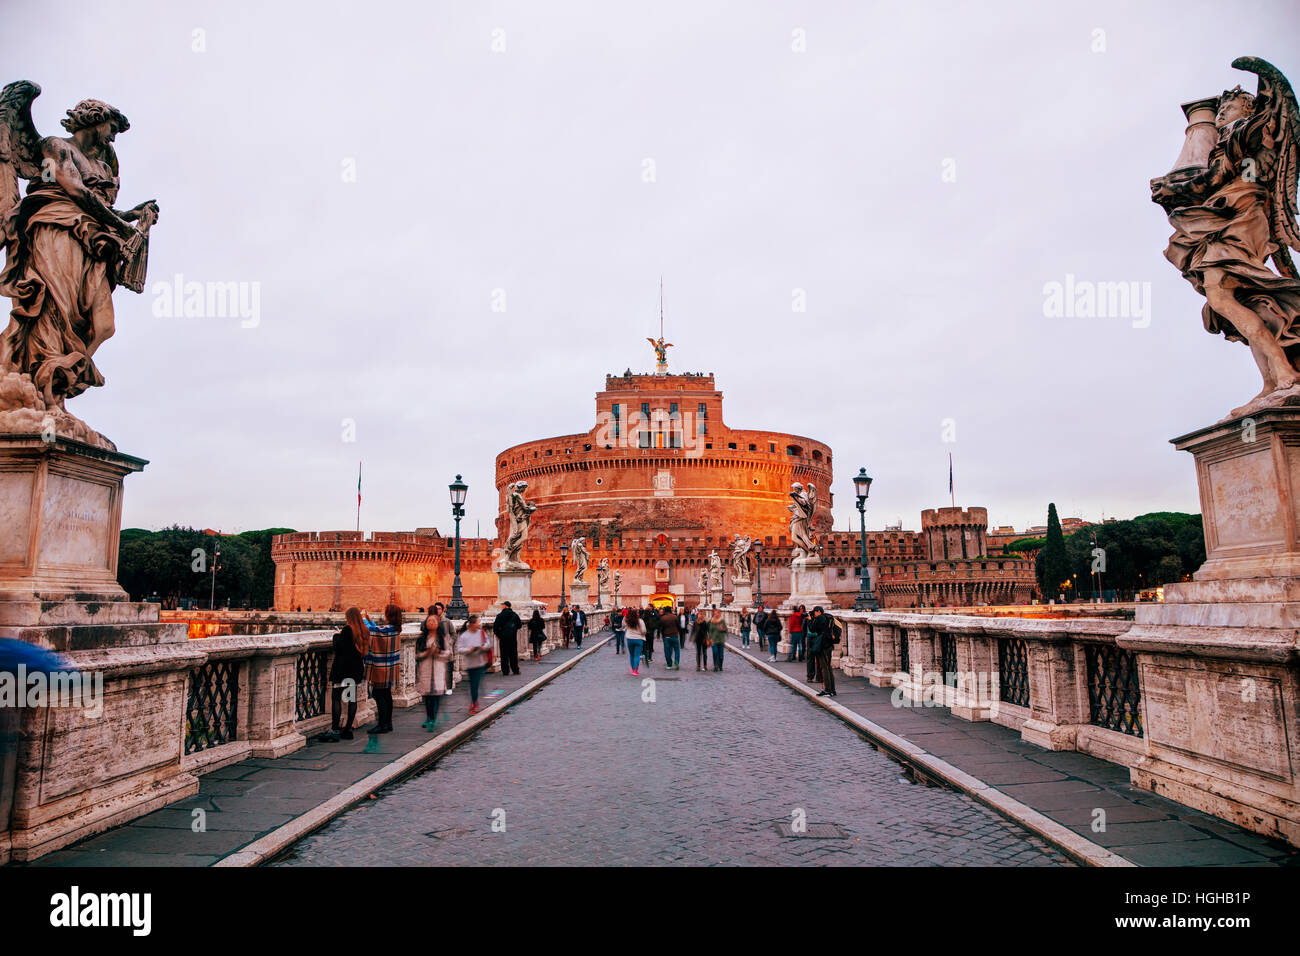 ROME - NOVEMBER 07: The Mausoleum of Hadrian (Castel and Ponte Sant'Angelo) with people on November 7, 2016 in Rome, Italy. Stock Photo